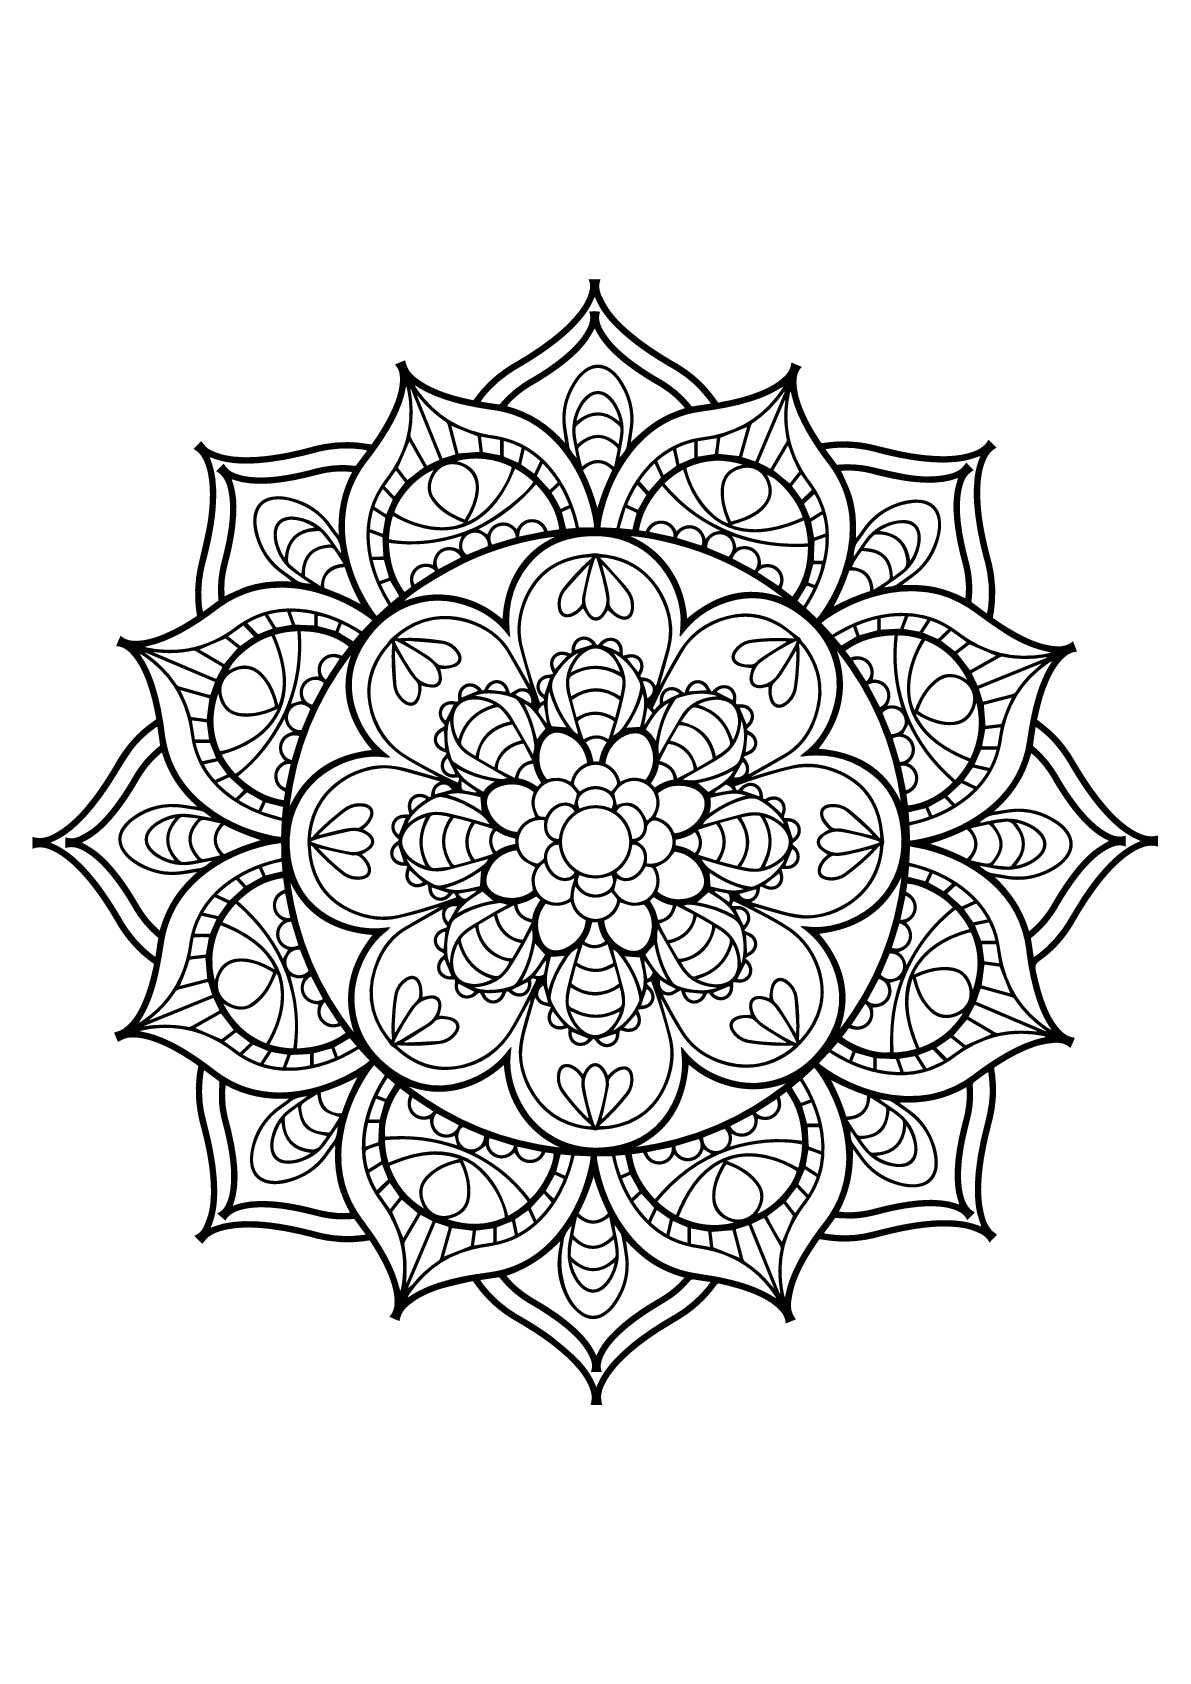 Mandala from free coloring books for adults